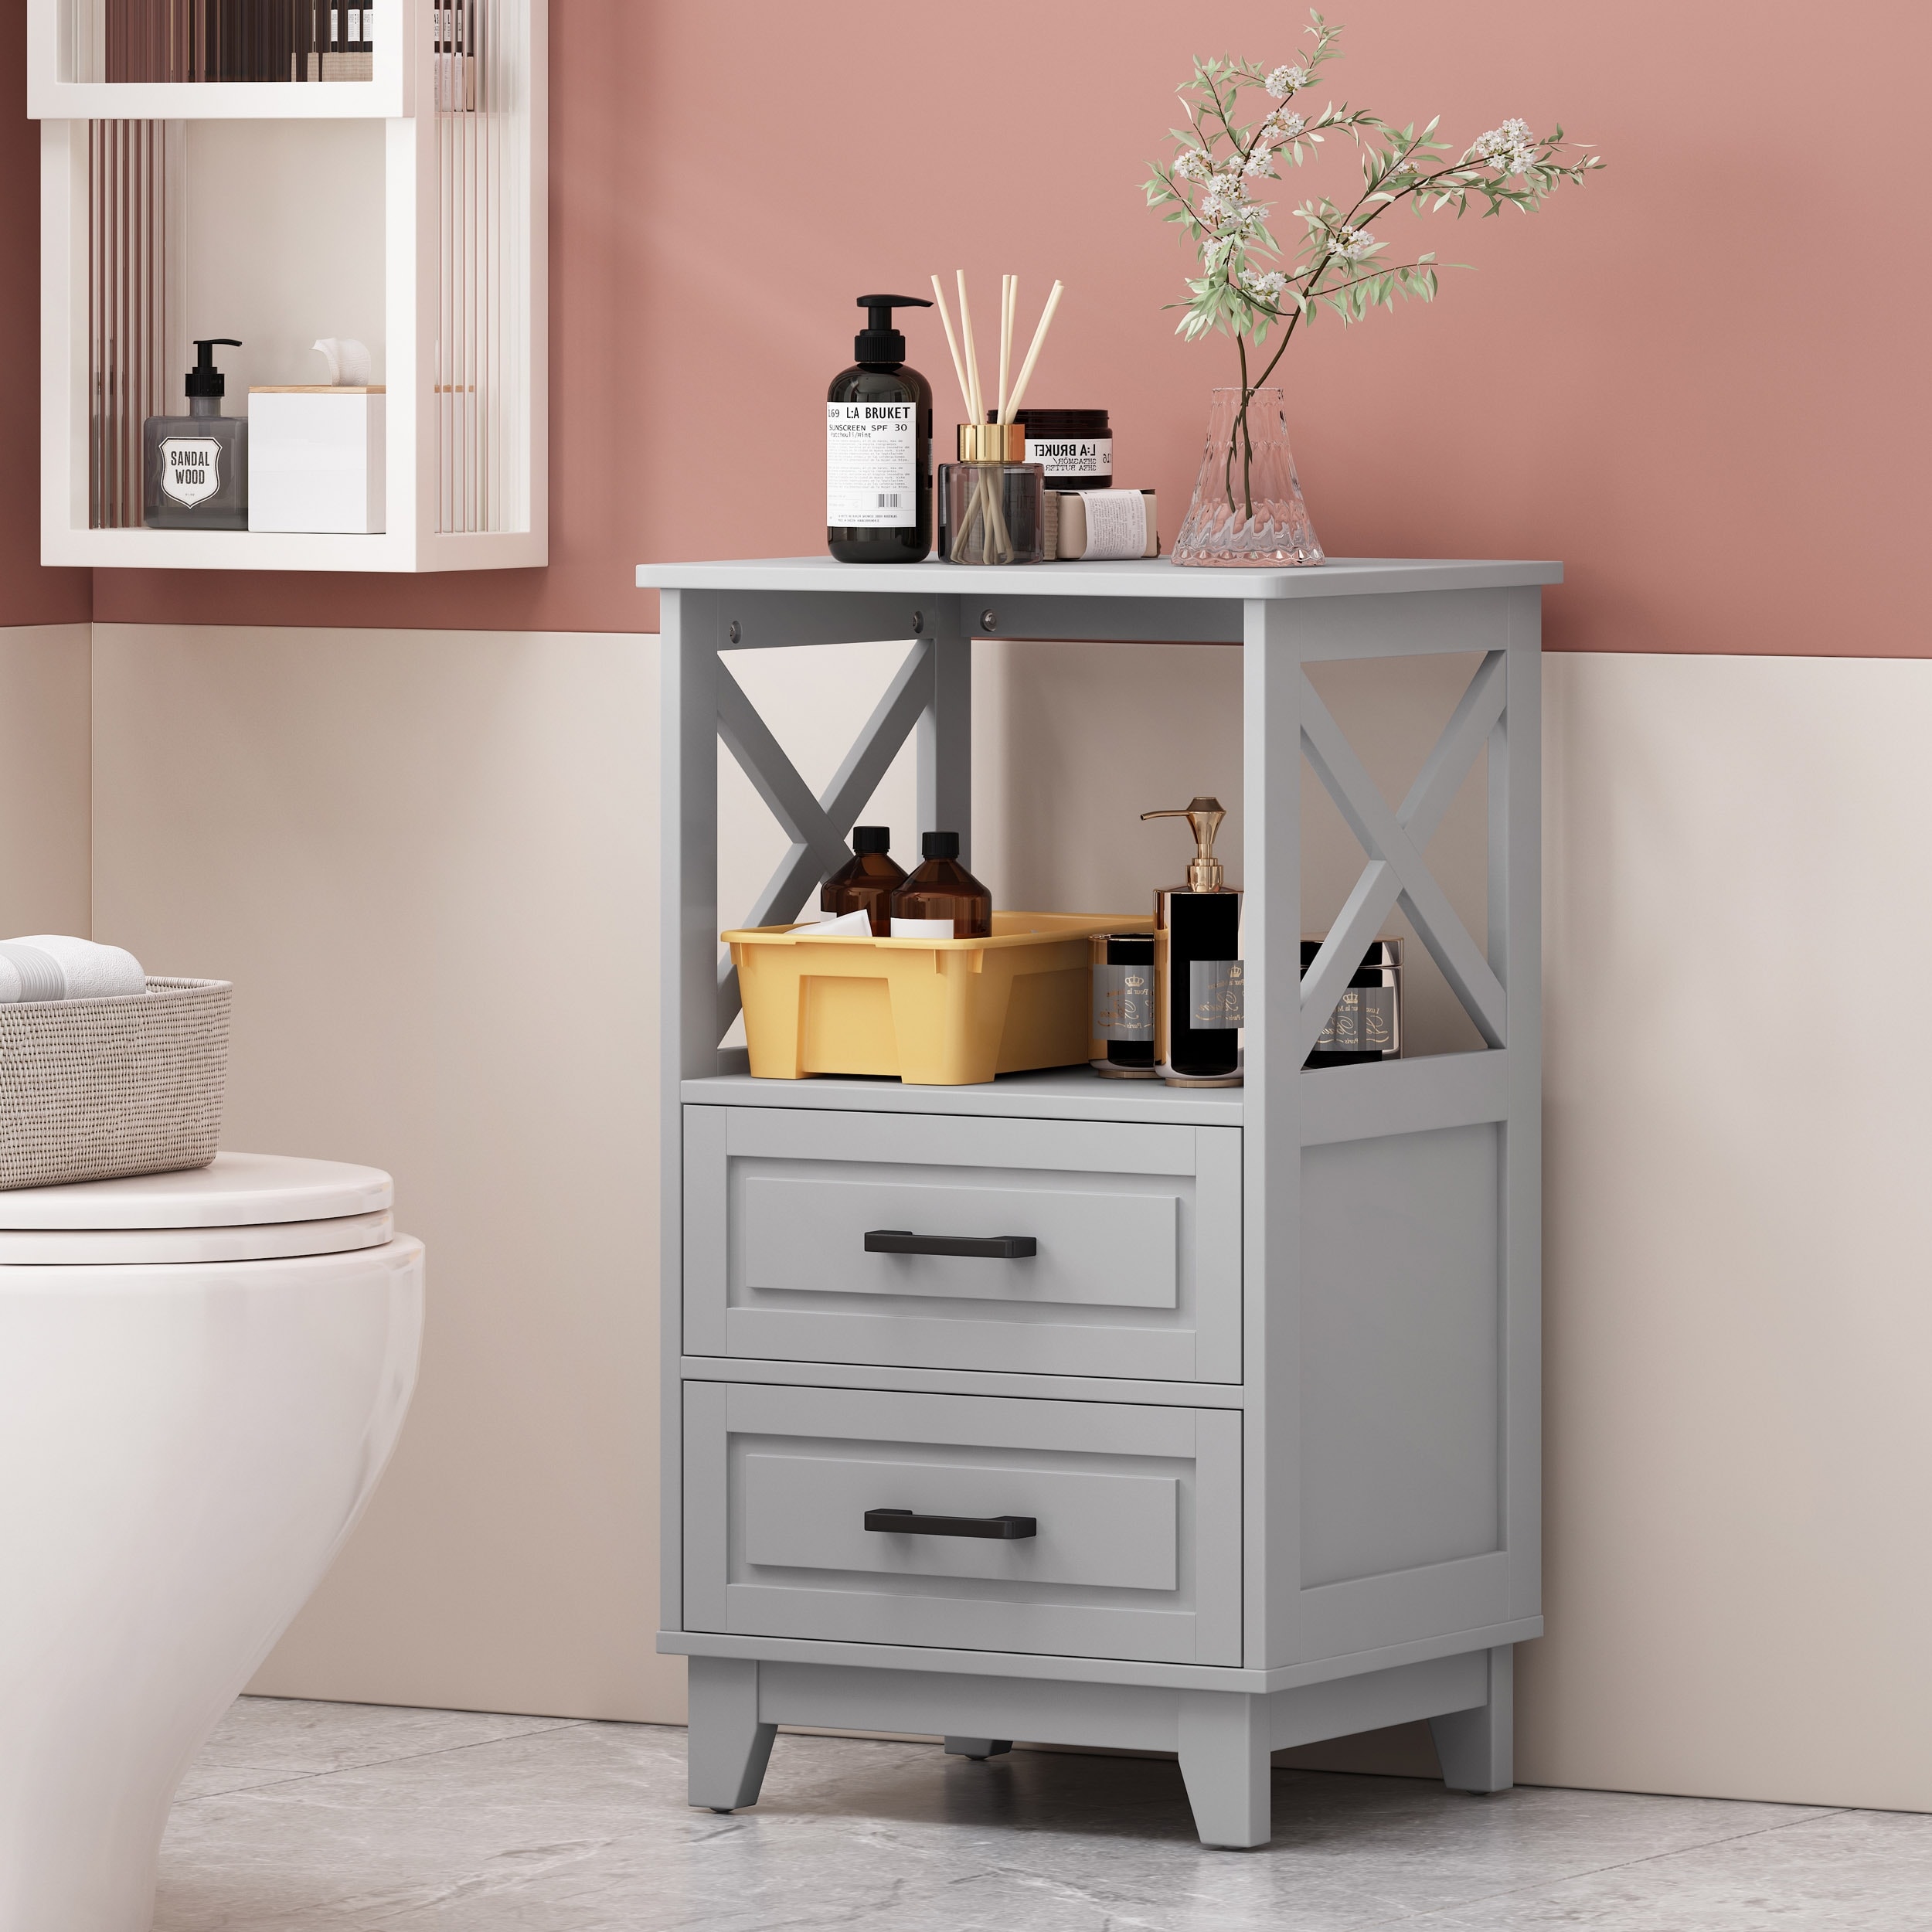 https://ak1.ostkcdn.com/images/products/is/images/direct/140e3755a9bf32d3640f4eef57dd432dd9b9bc71/Chellis-Bathroom-Storage-Cabinet-with-Drawers-by-Christopher-Knight-Home.jpg